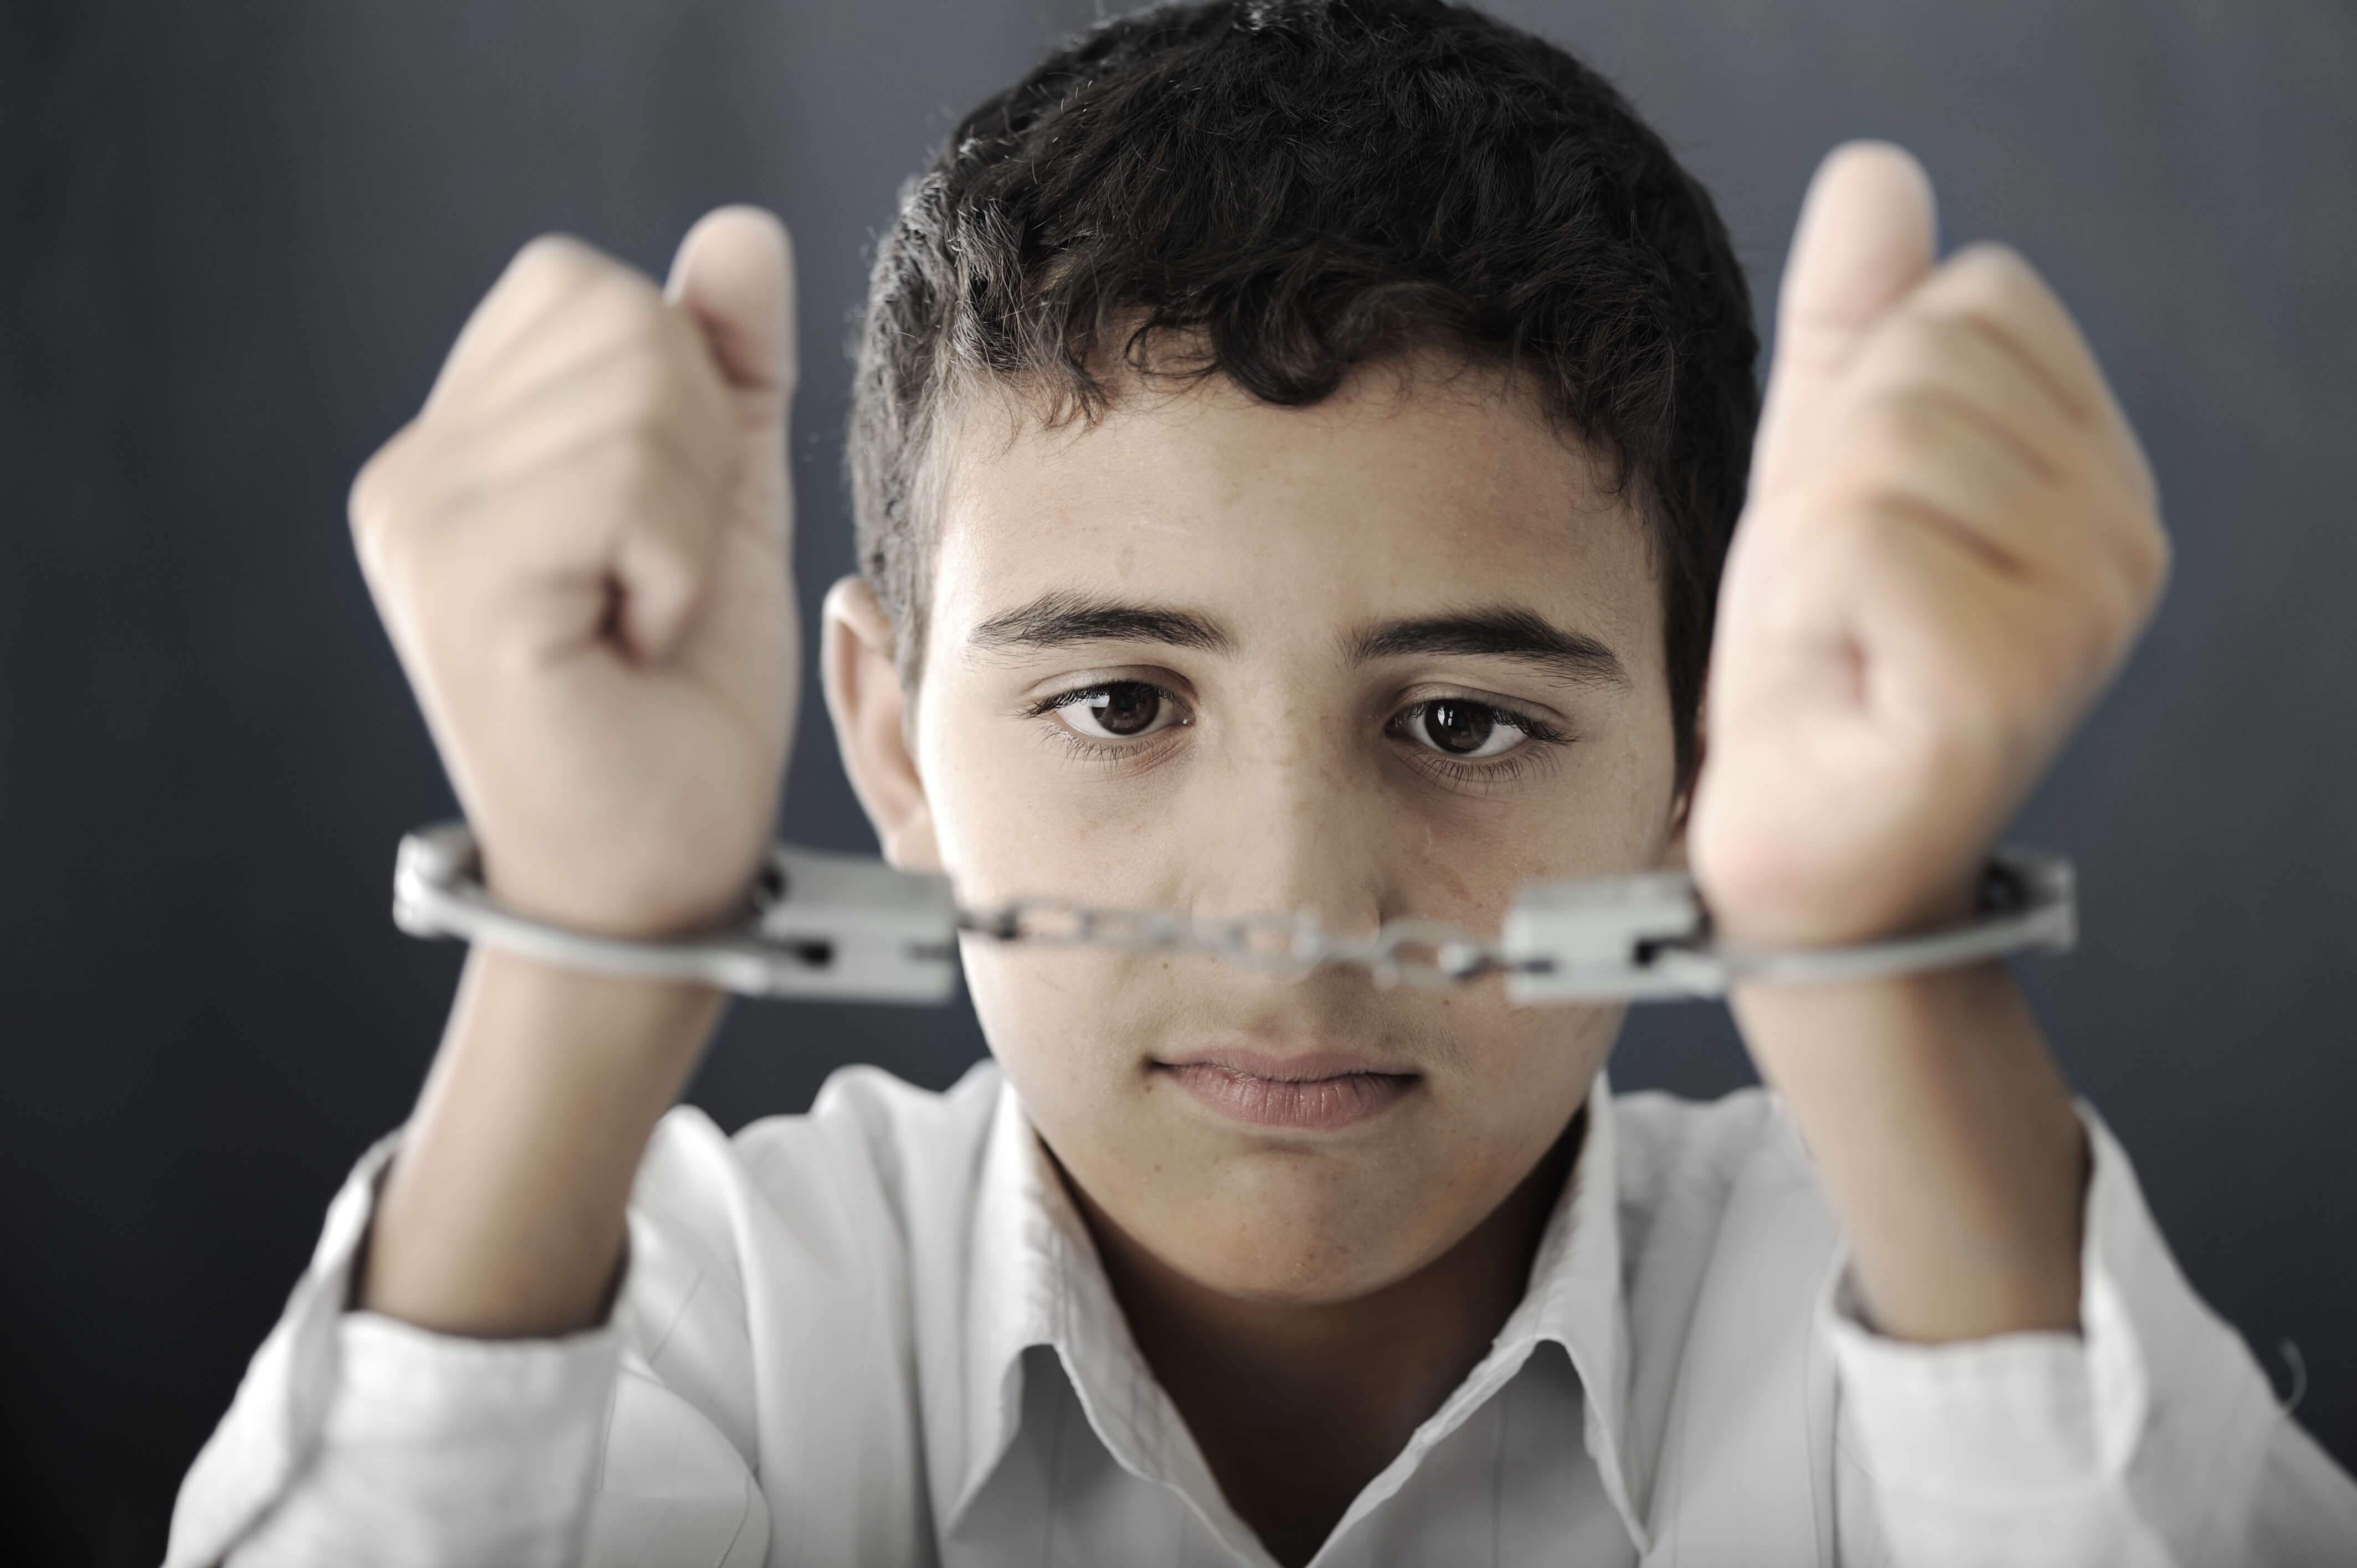 Child in handcuffs - juvenile criminal charges